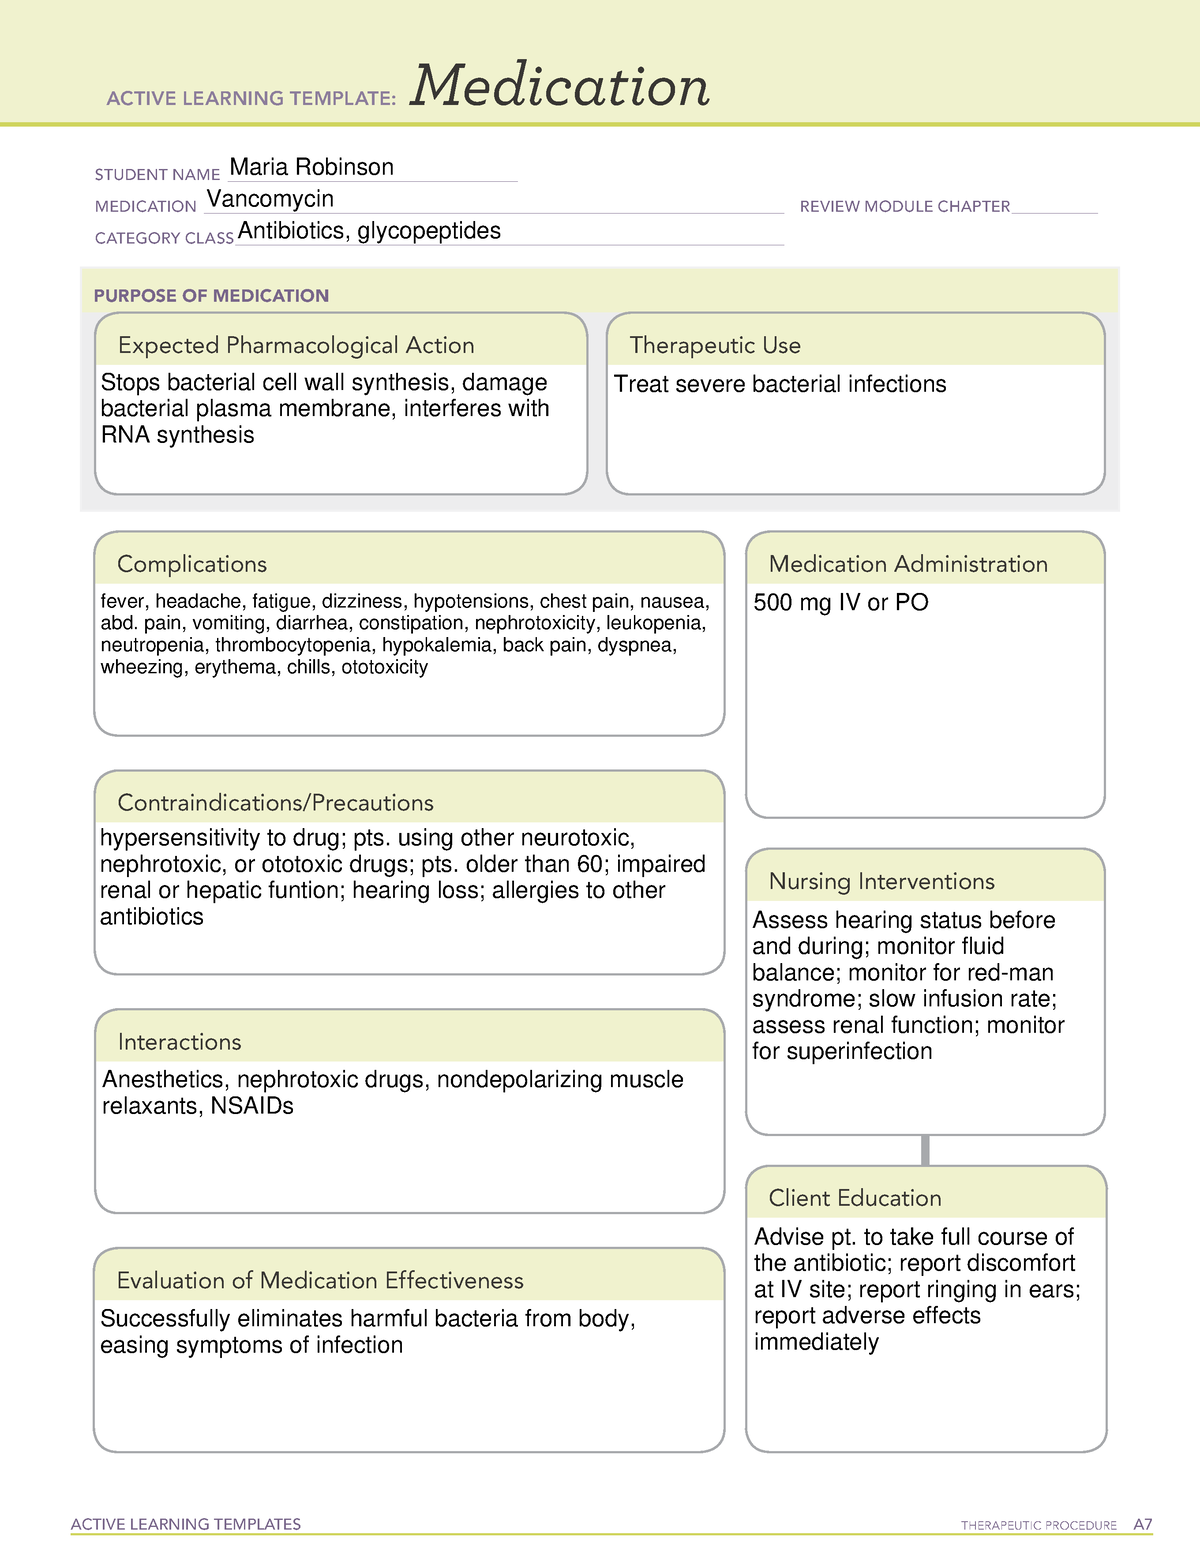 vancomycin-med-card-active-learning-templates-therapeutic-procedure-a